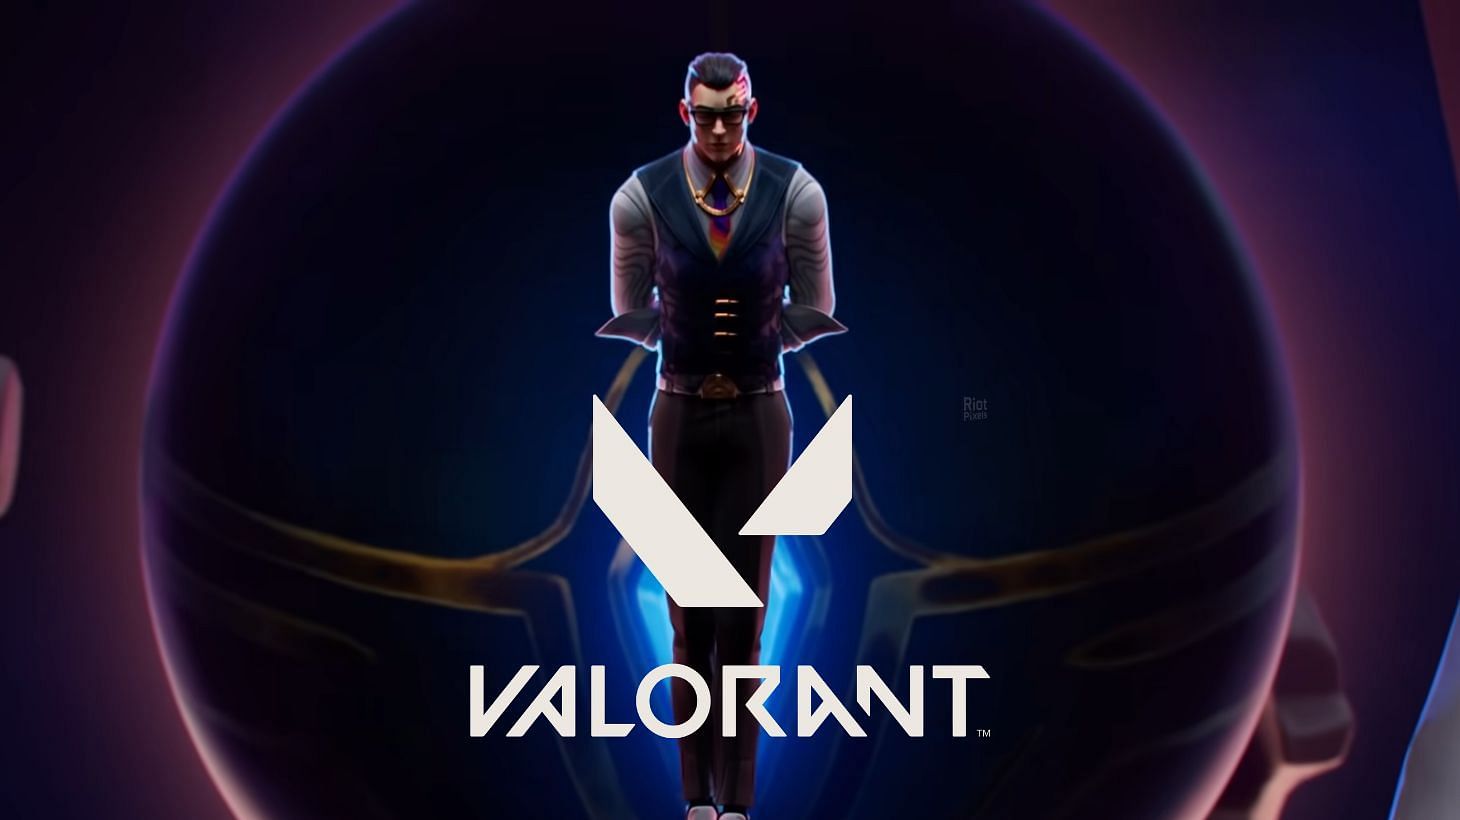 Valorant - game wallpapers at Riot Pixels, images